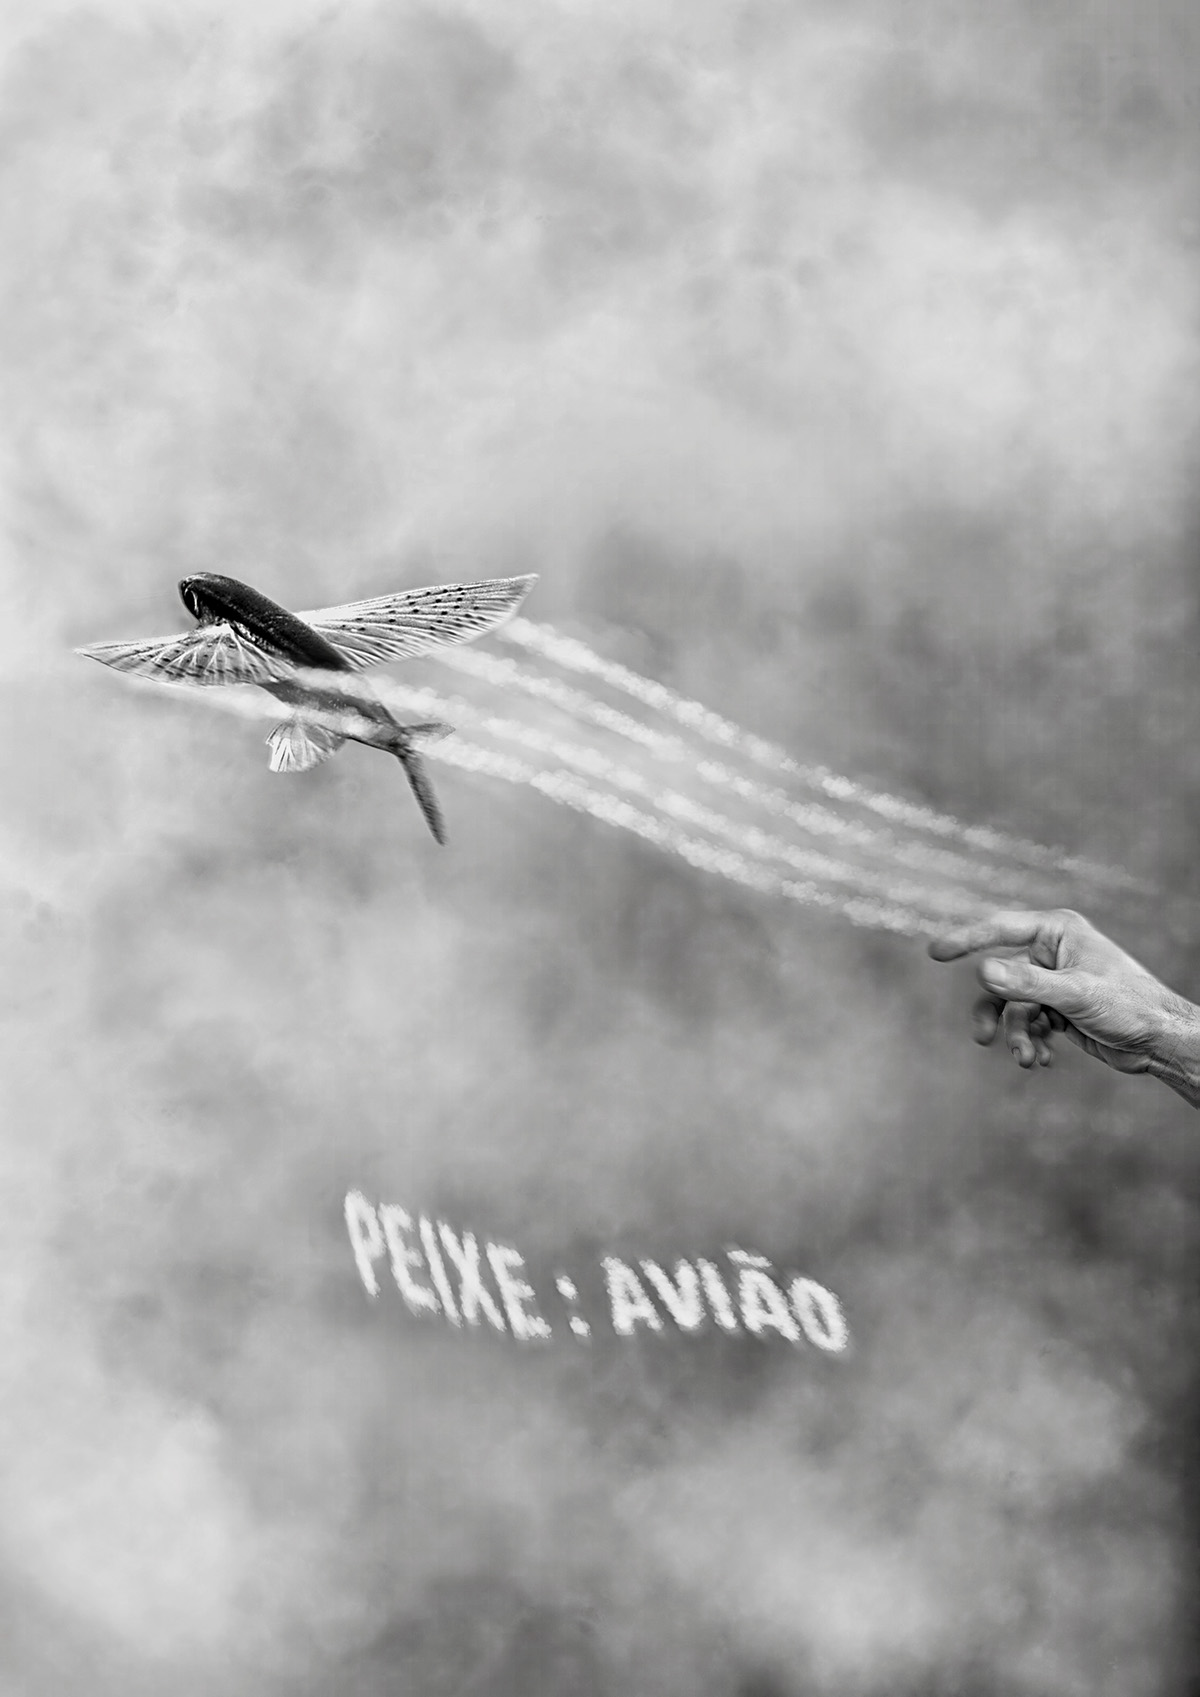 peixe Avião Portugal banda gig poster flying fish fish hand airplane Paper plane black and white collage plane clouds